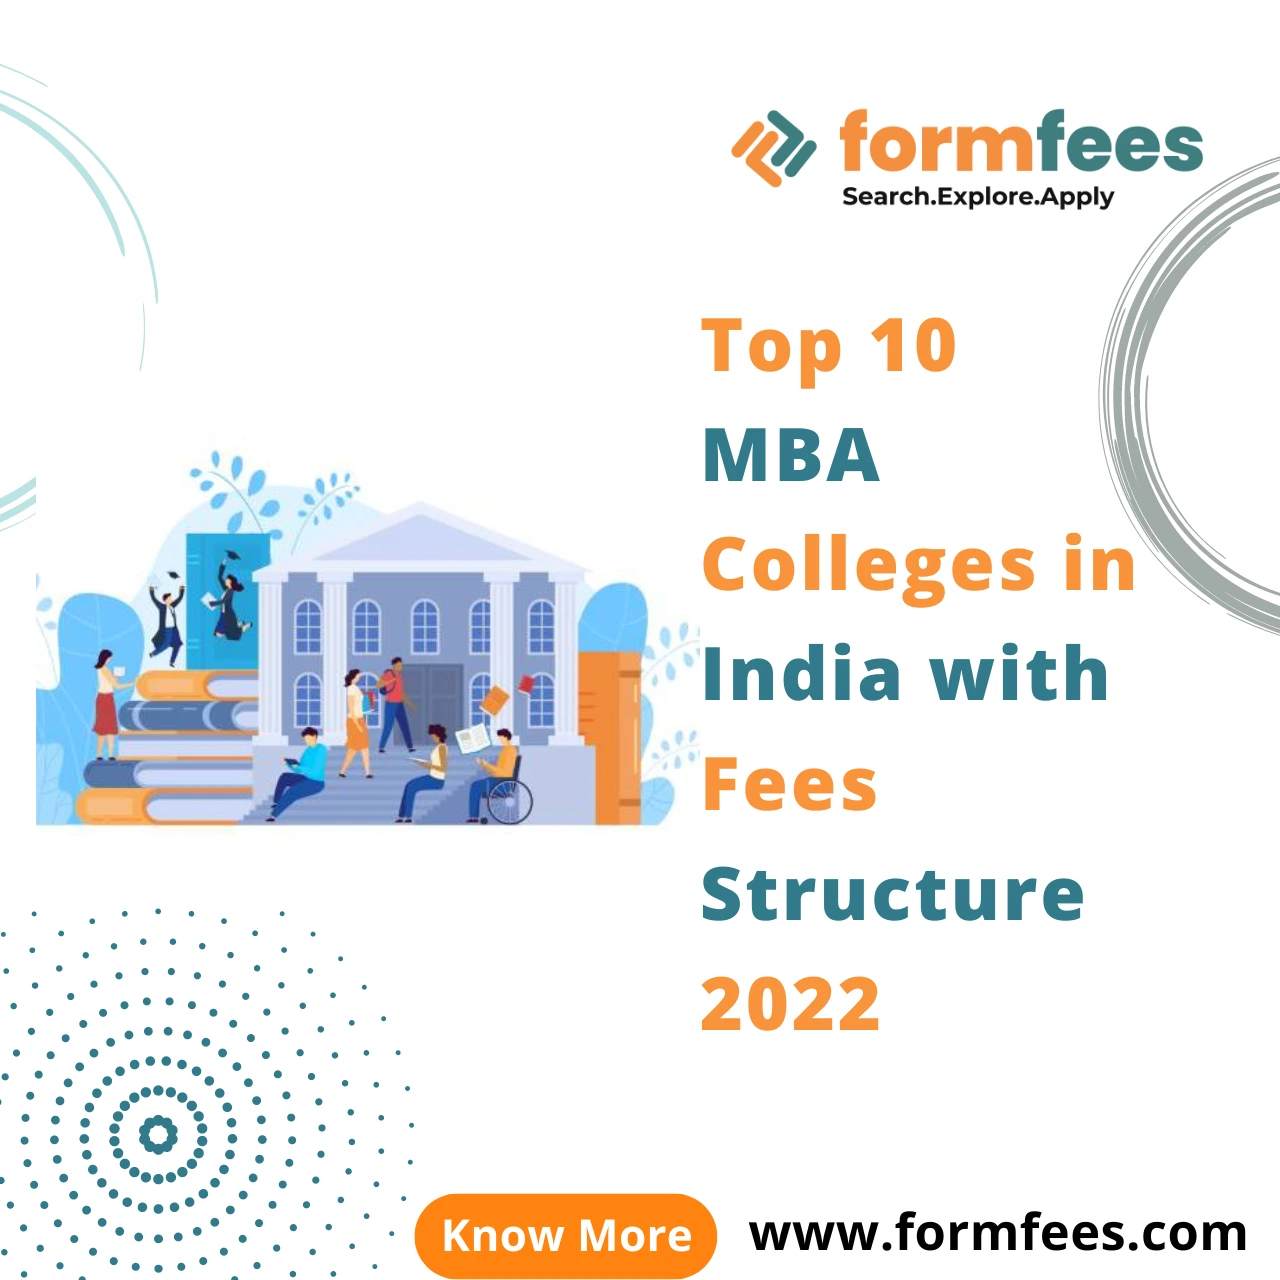 Top 10 MBA Colleges in India with Fees Structure 2022